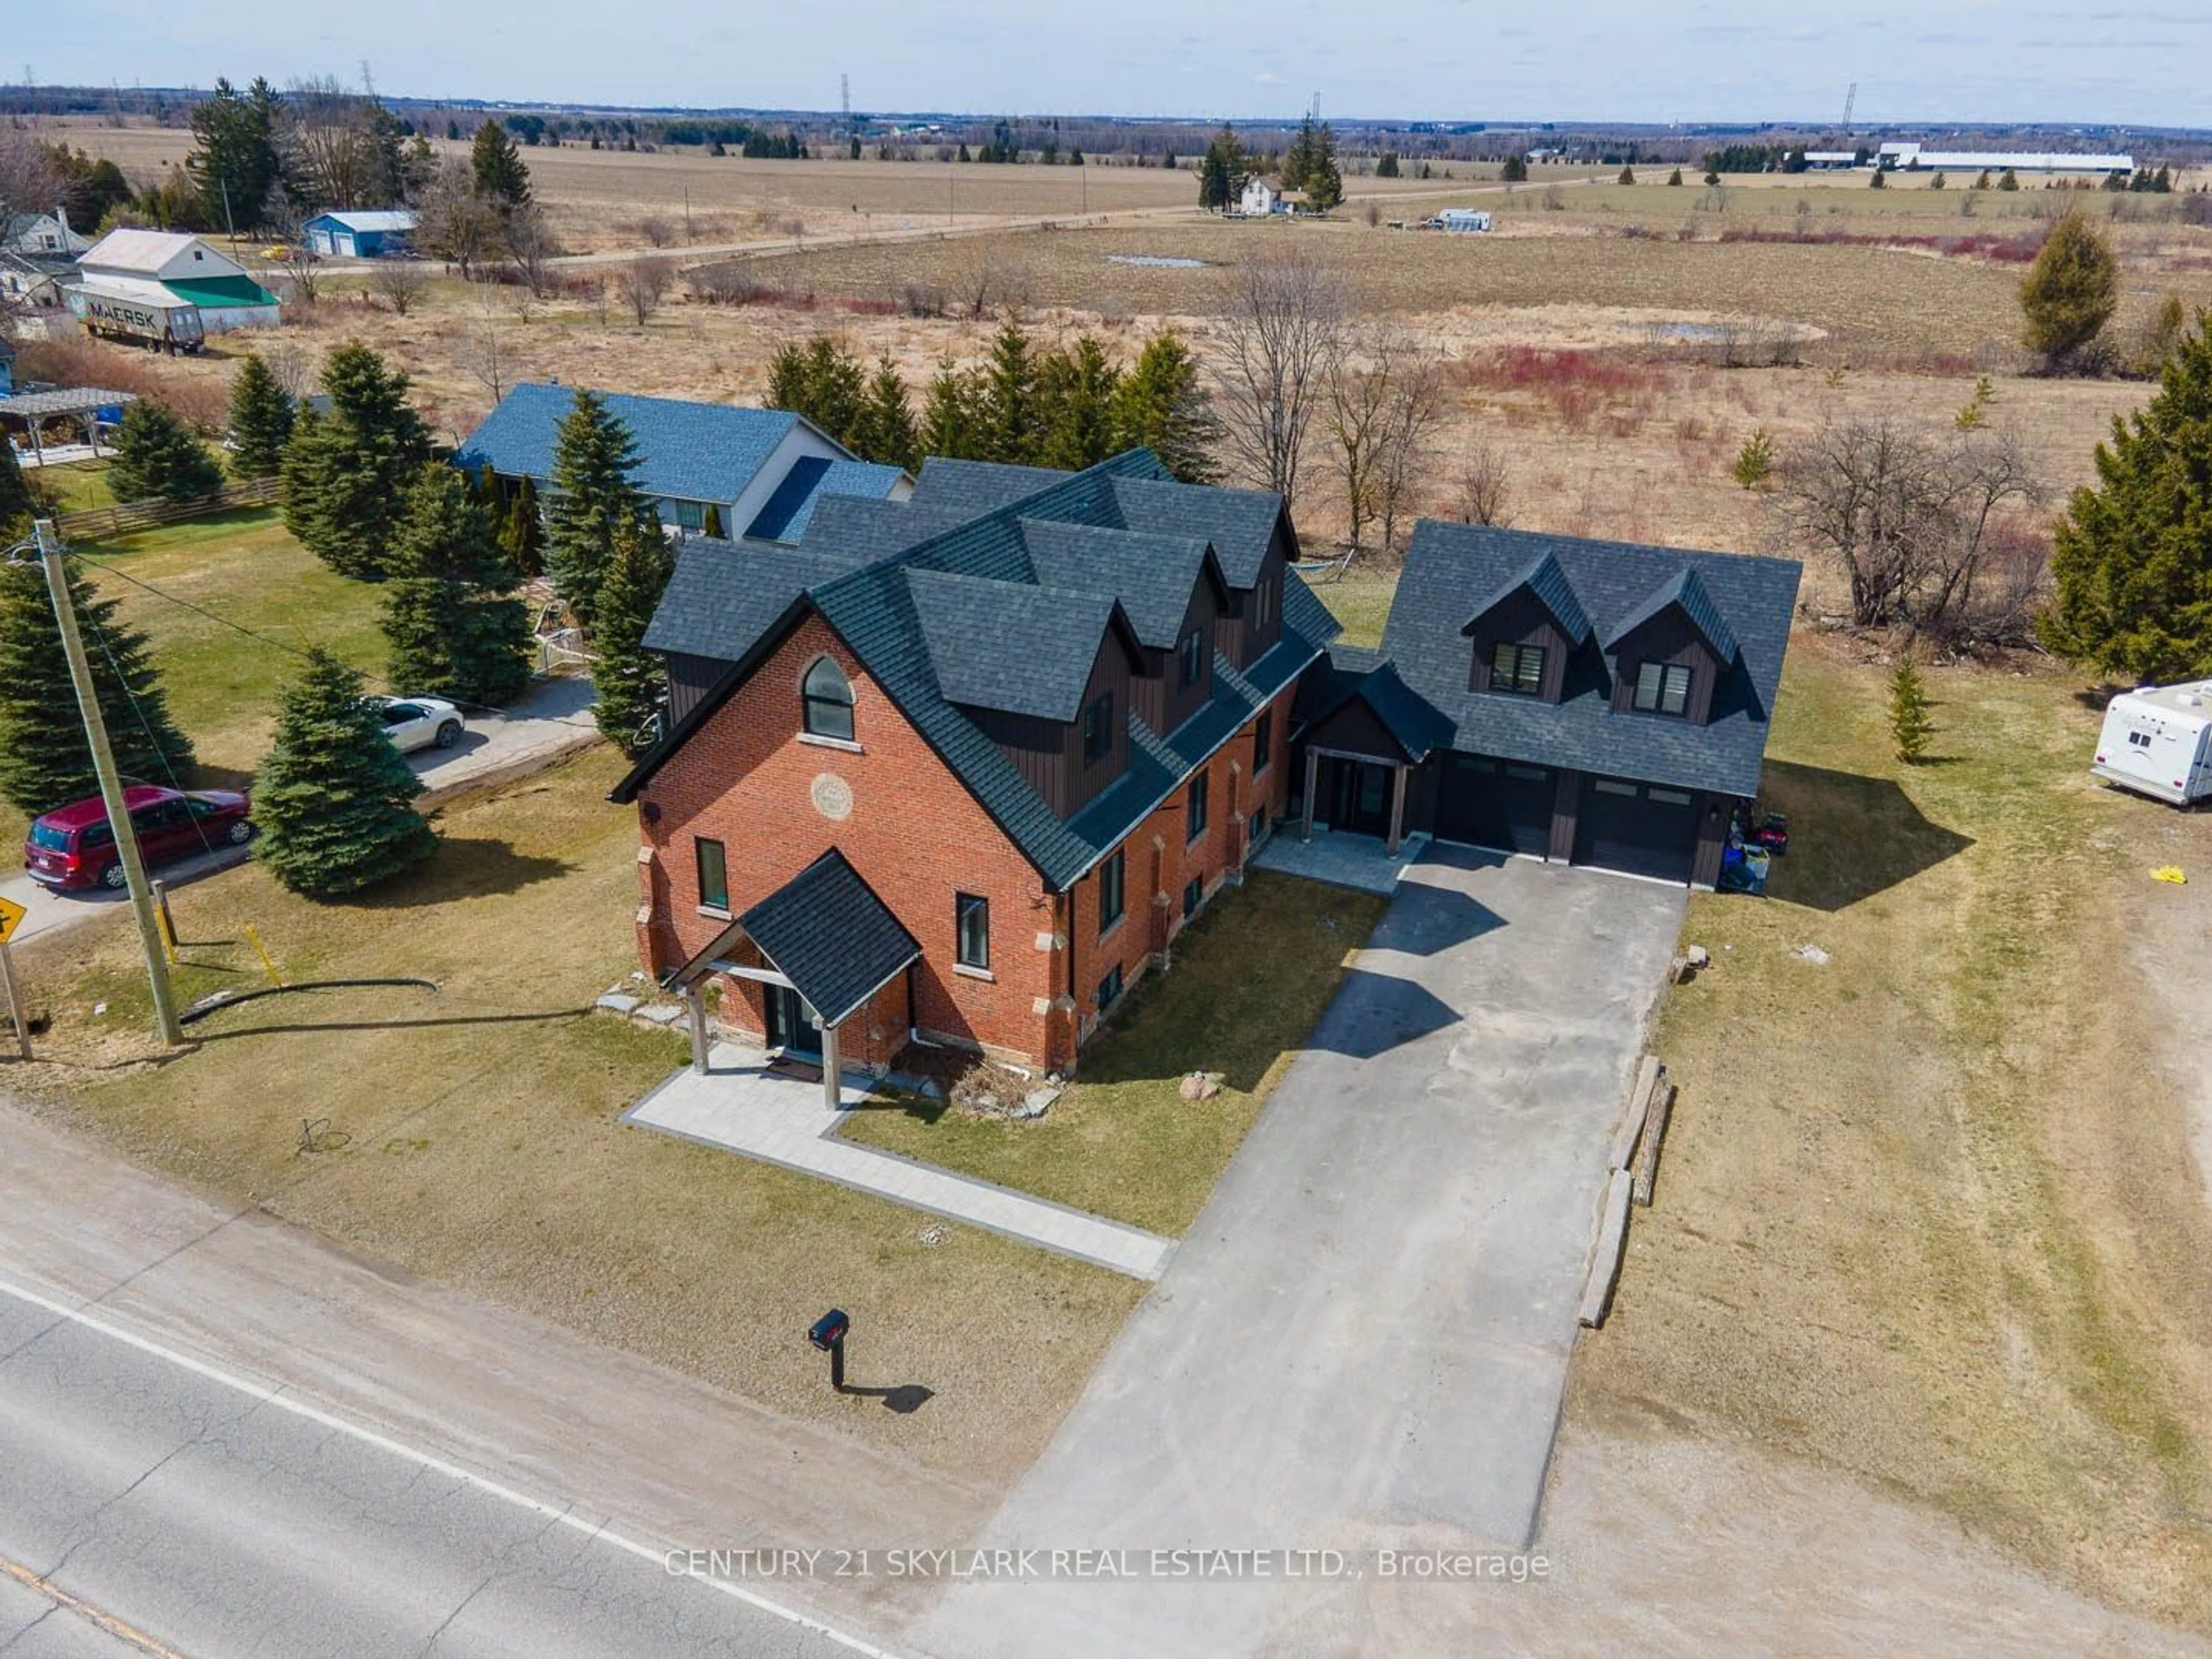 Home with brick exterior material for 63011 Dufferin Rd 3 Rd, East Garafraxa Ontario L9W 1J7